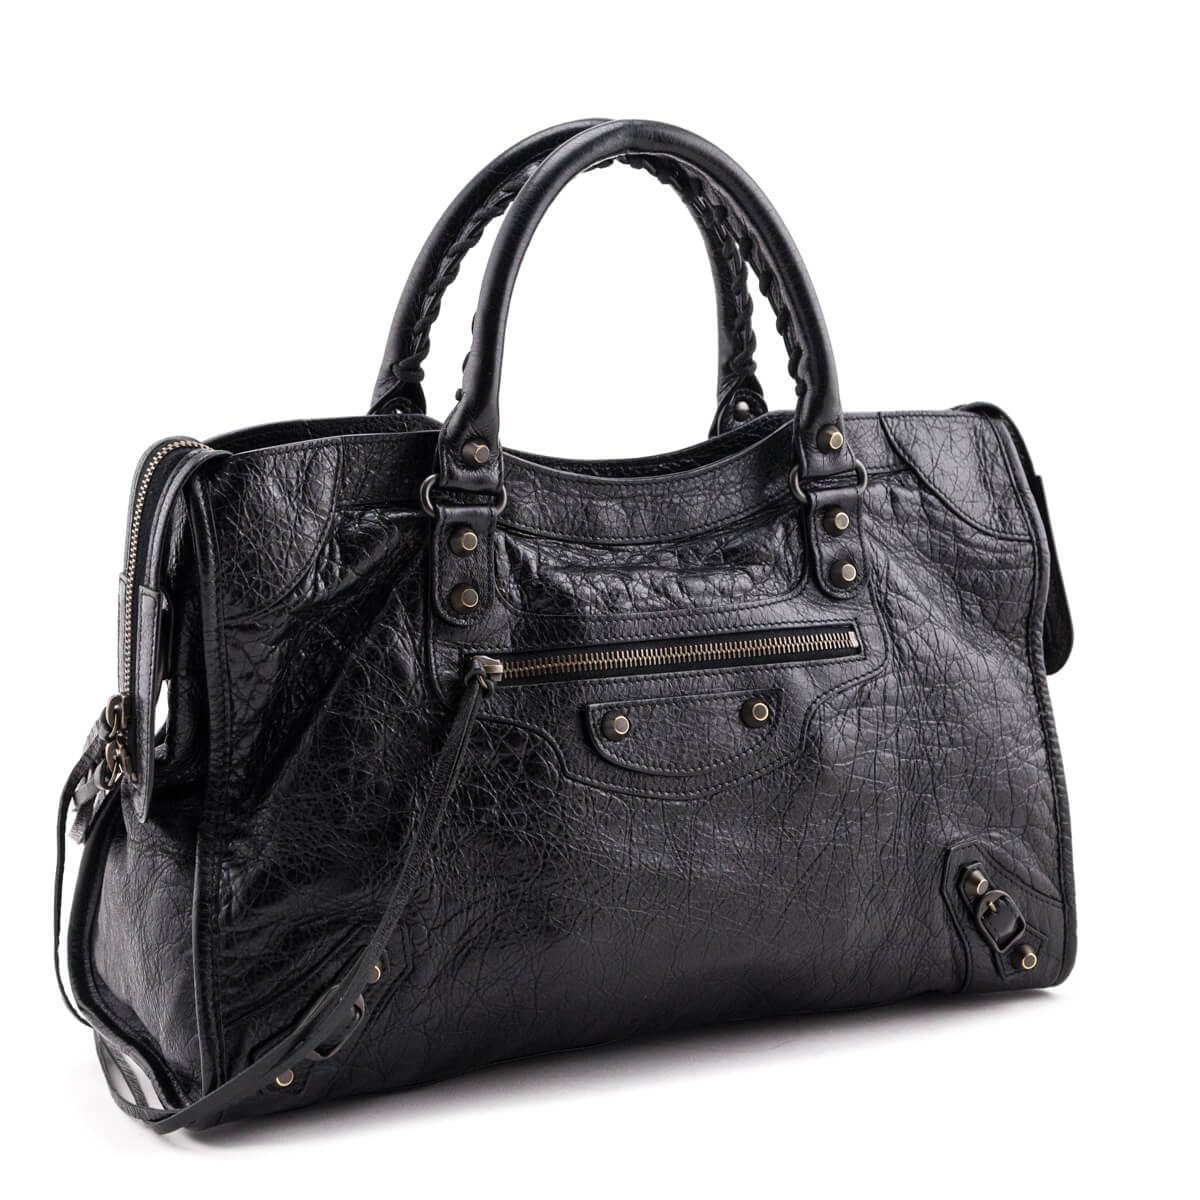 BALENCIAGA QUILTED LEATHER CLASSIC CITY BAG  eBay